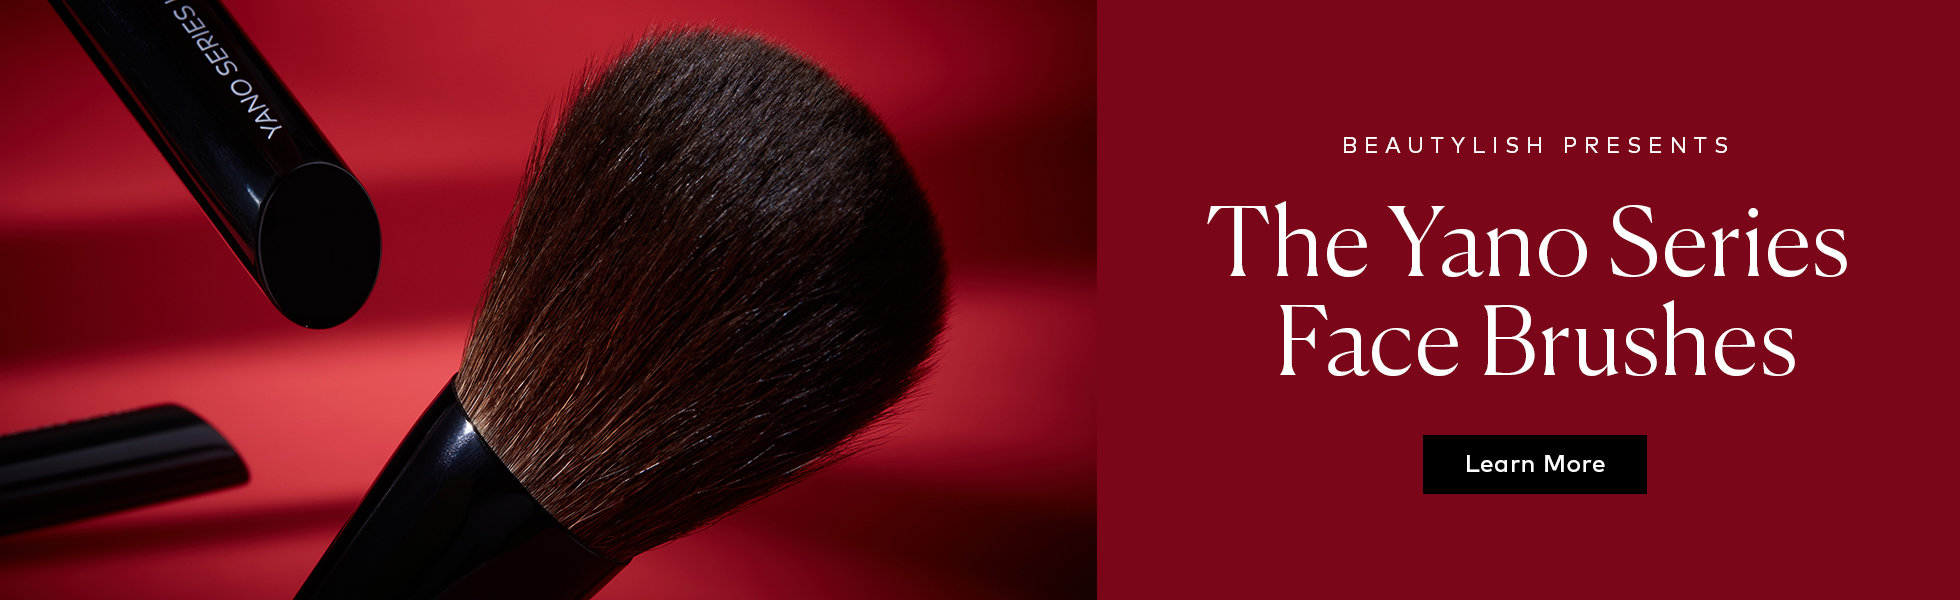 Beautylish Presents The Yano Series Face Brushes – learn more.